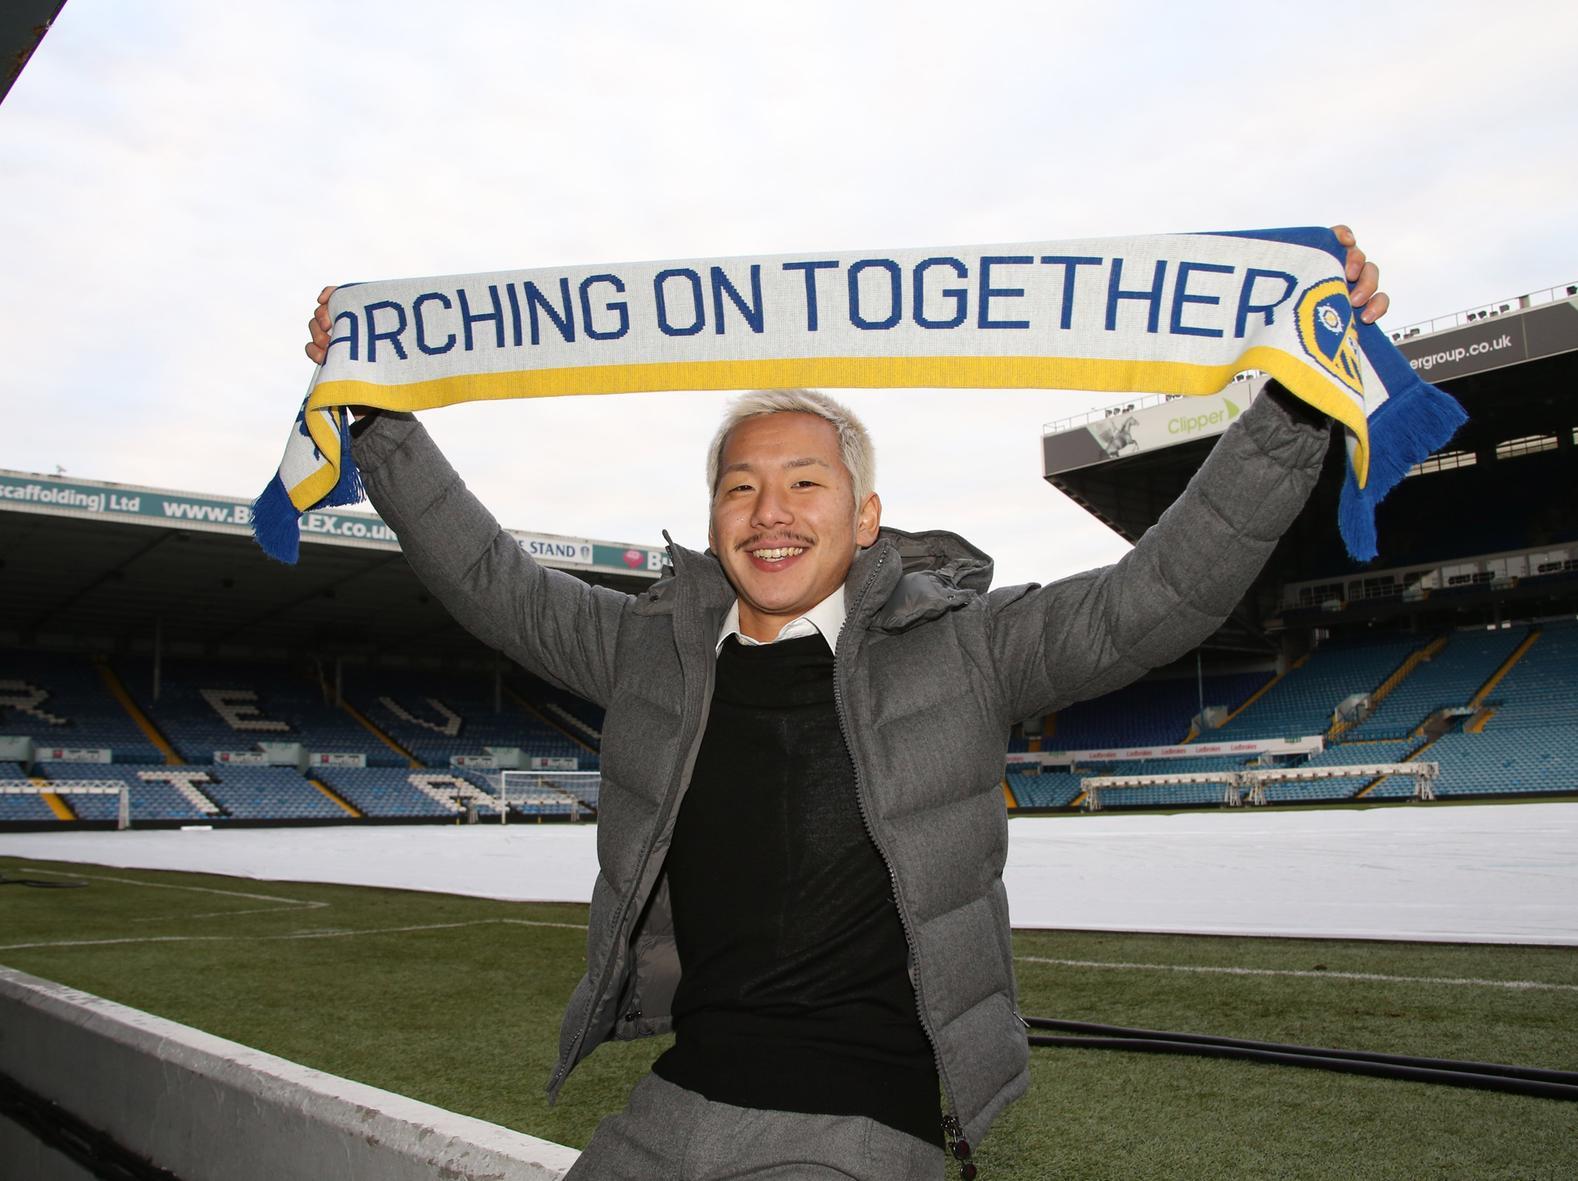 Leeds sorted this signing in advance of the window opening and paid Gamba Osaka 500,000 for Ideguchi's signature. Never made an appearance before his departure.